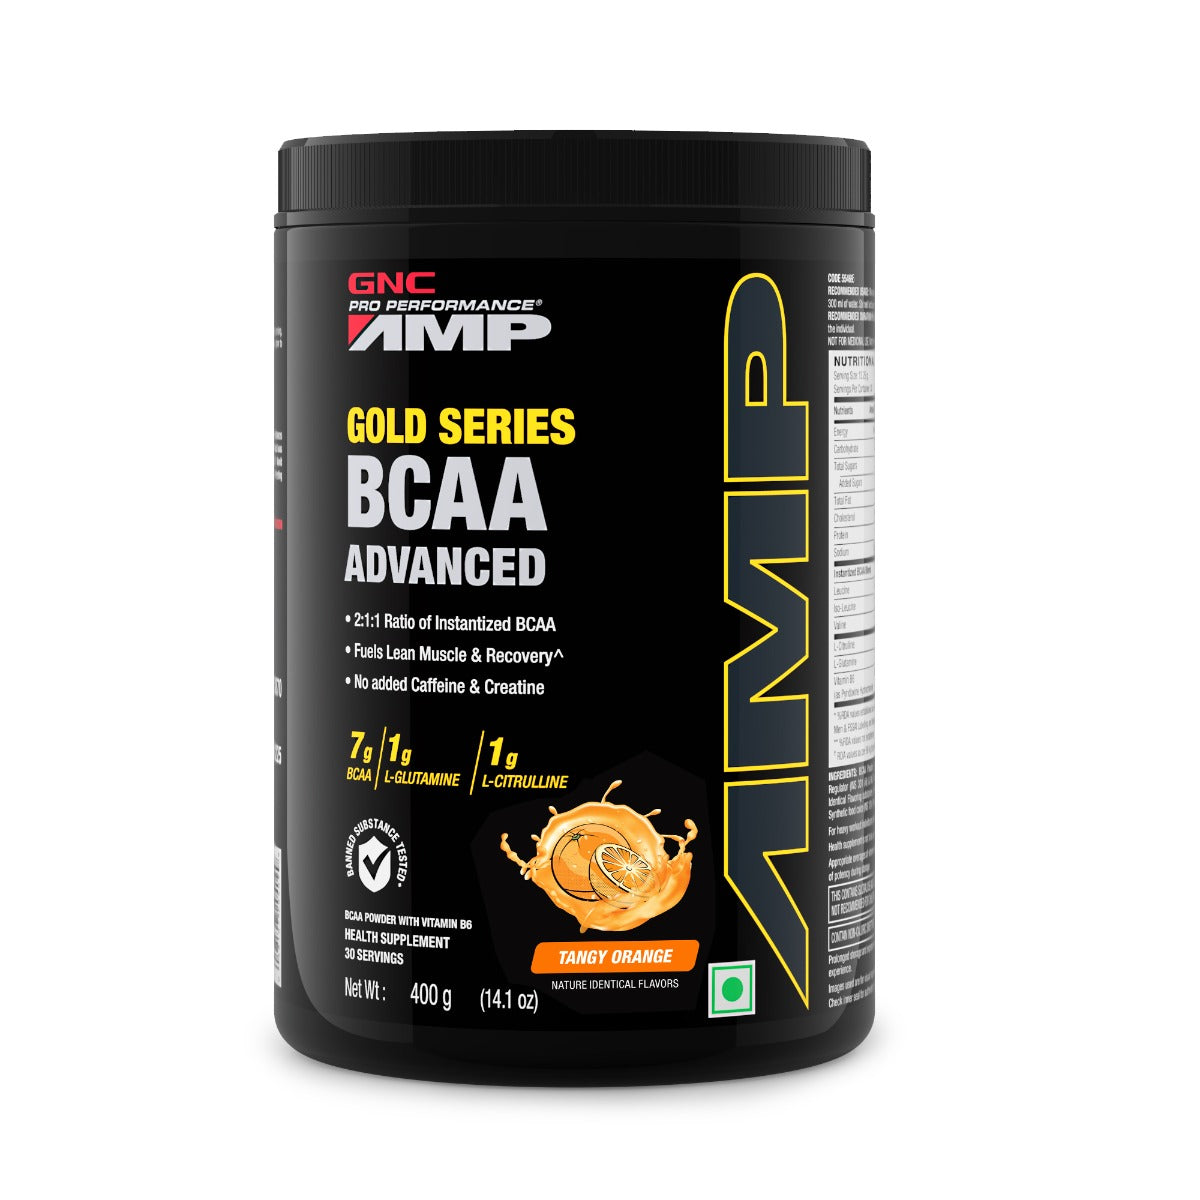 John's Fitness Favs - For Athletic Performance | Supports Intense Workout | Supports Liver Health | Boosts Muscle Recovery | Fuels Muscle Strength